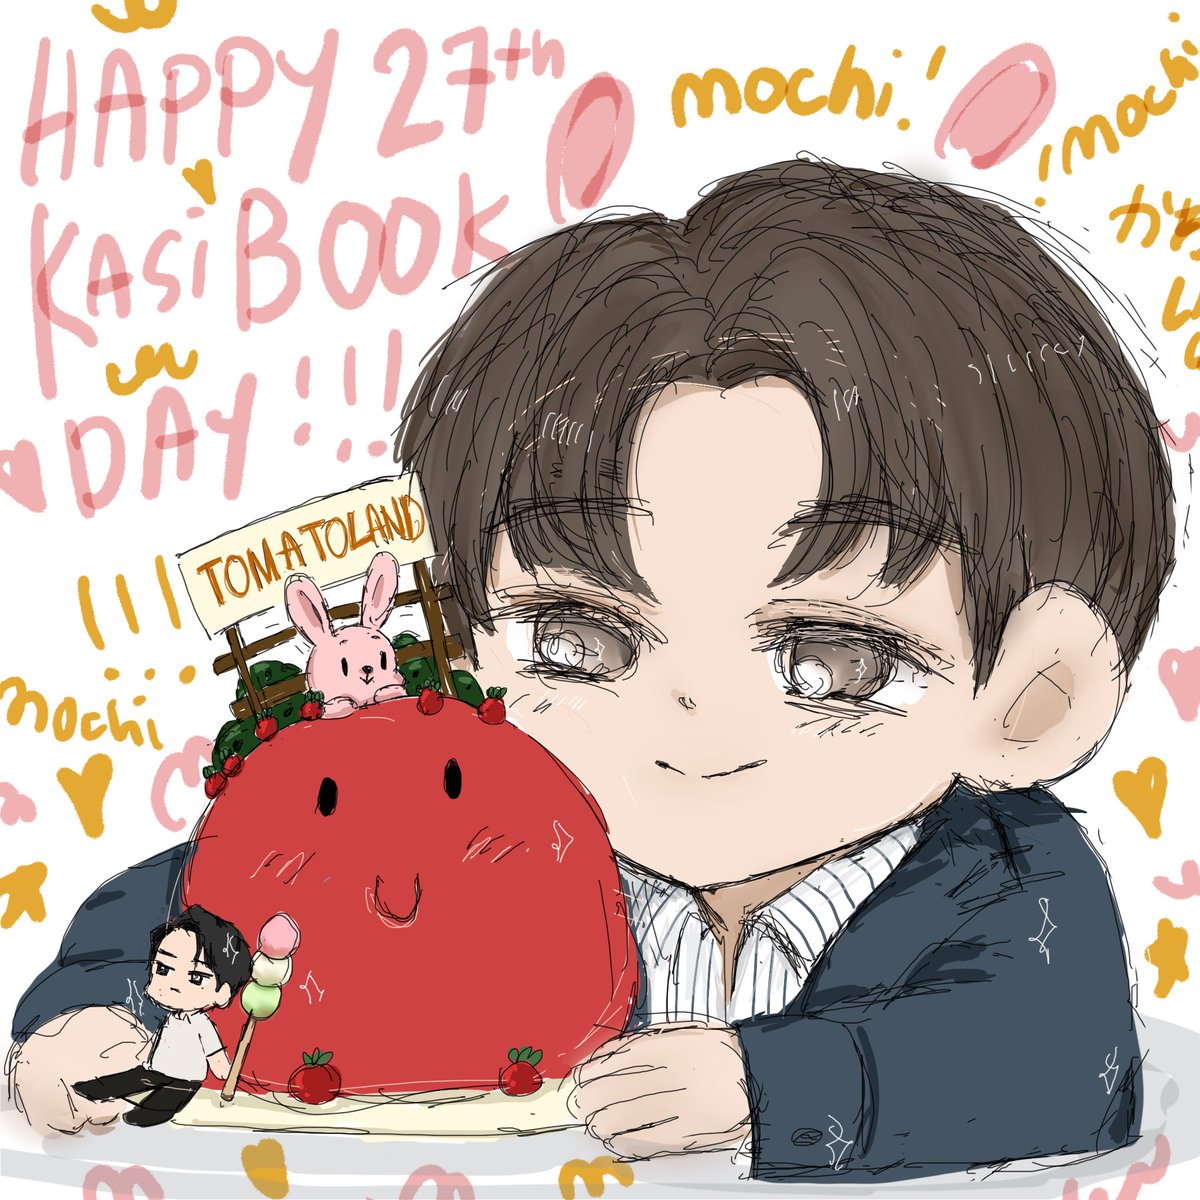 Happiest Birthday to the Sunshine Bunny-Mochi owner of Tomatoland 🍡🍅🐰✨ May your days ahead be full of warmth and happiness 🩵

#27thBookinTomatoLand #Happy27KasibookDay #kasibook